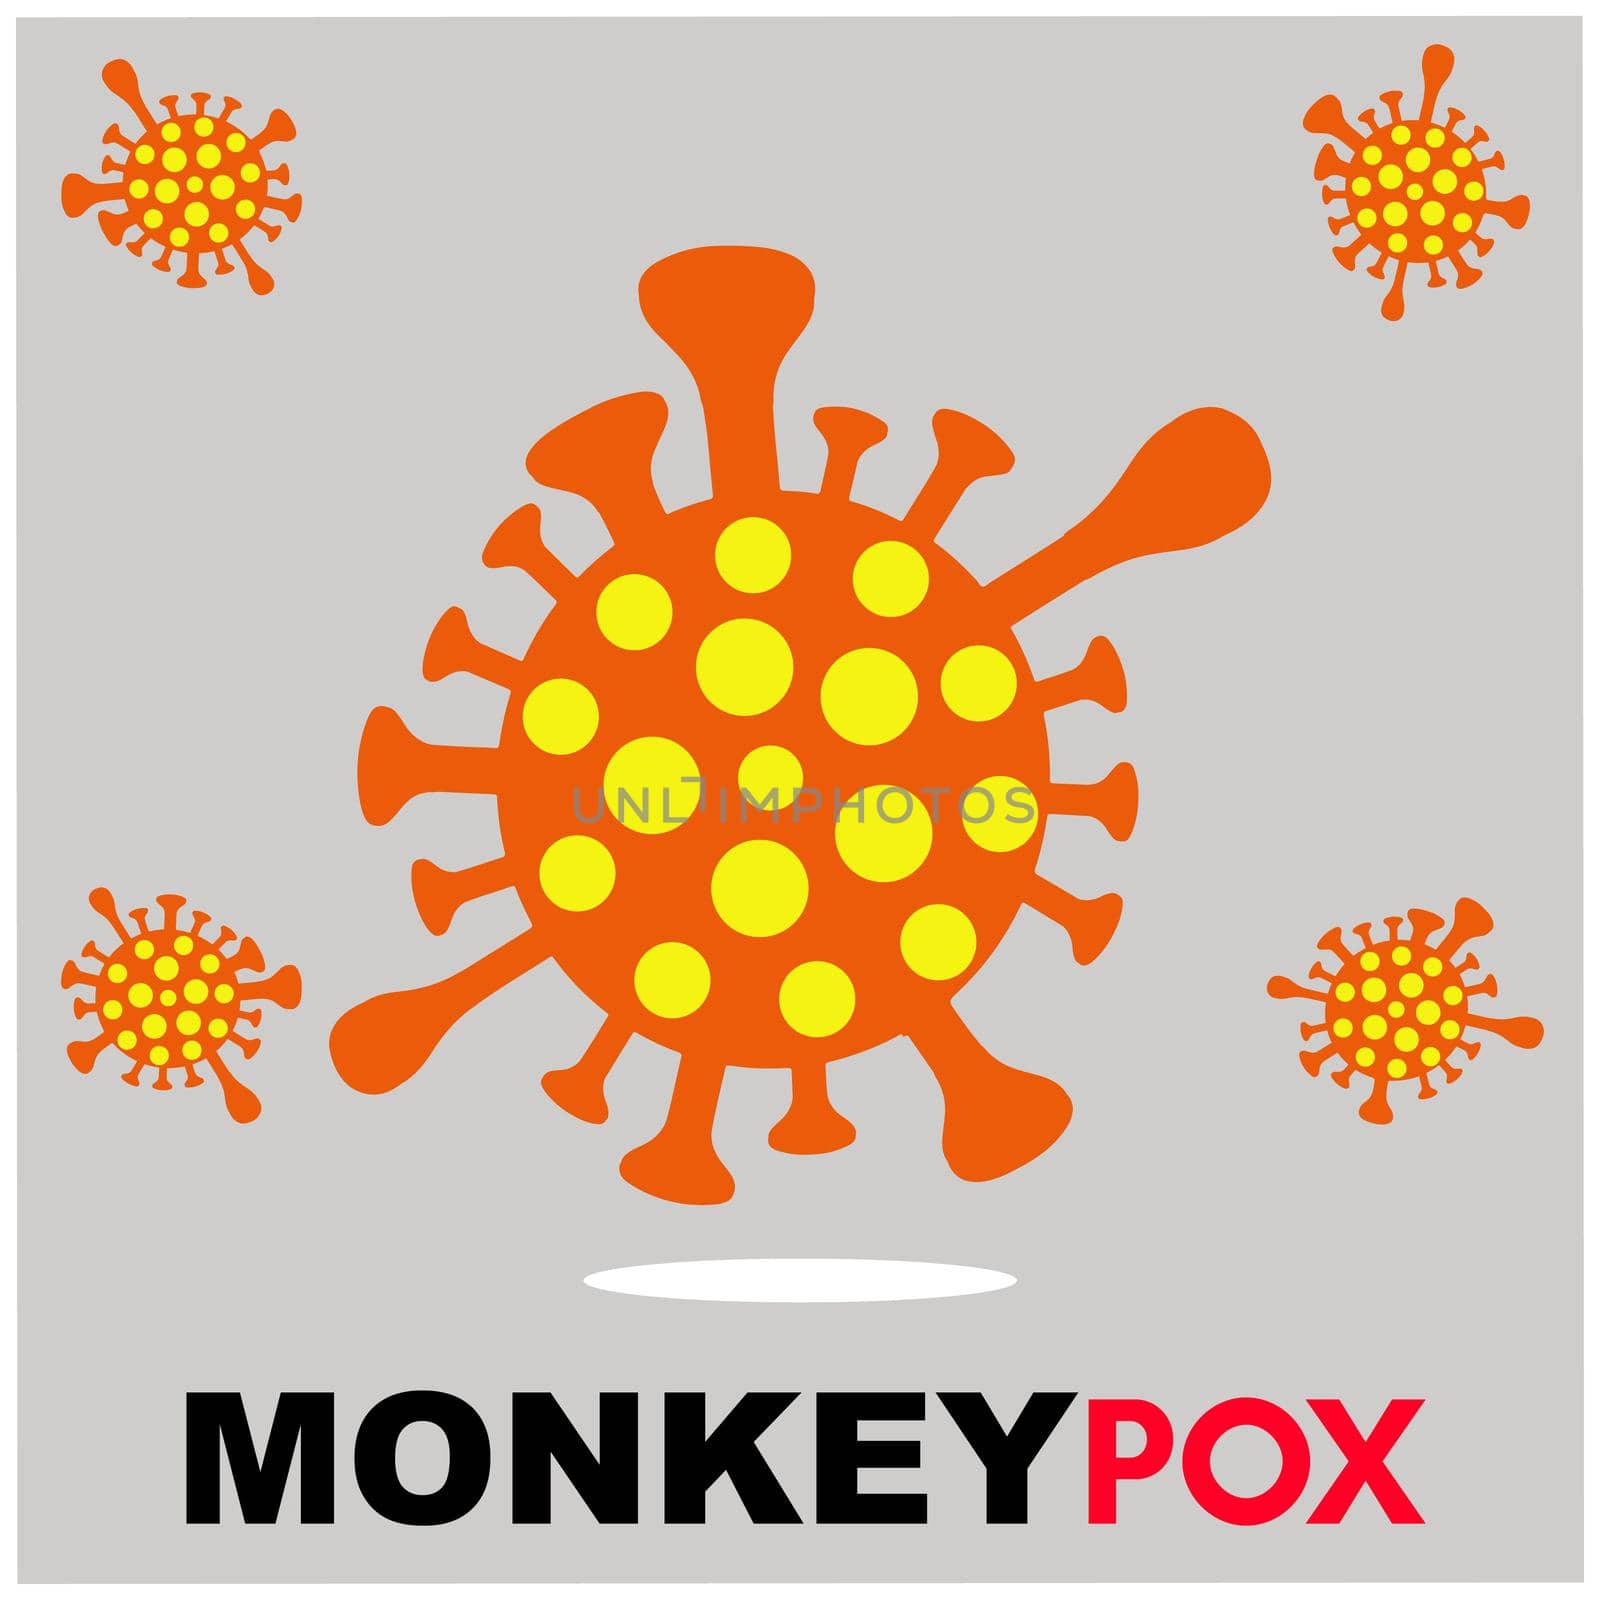 Monkeypox virus Illustration, vector of Hands with monkeypox, monkeypox virus outbreak pandemic design with microscopic view background by isaiphoto